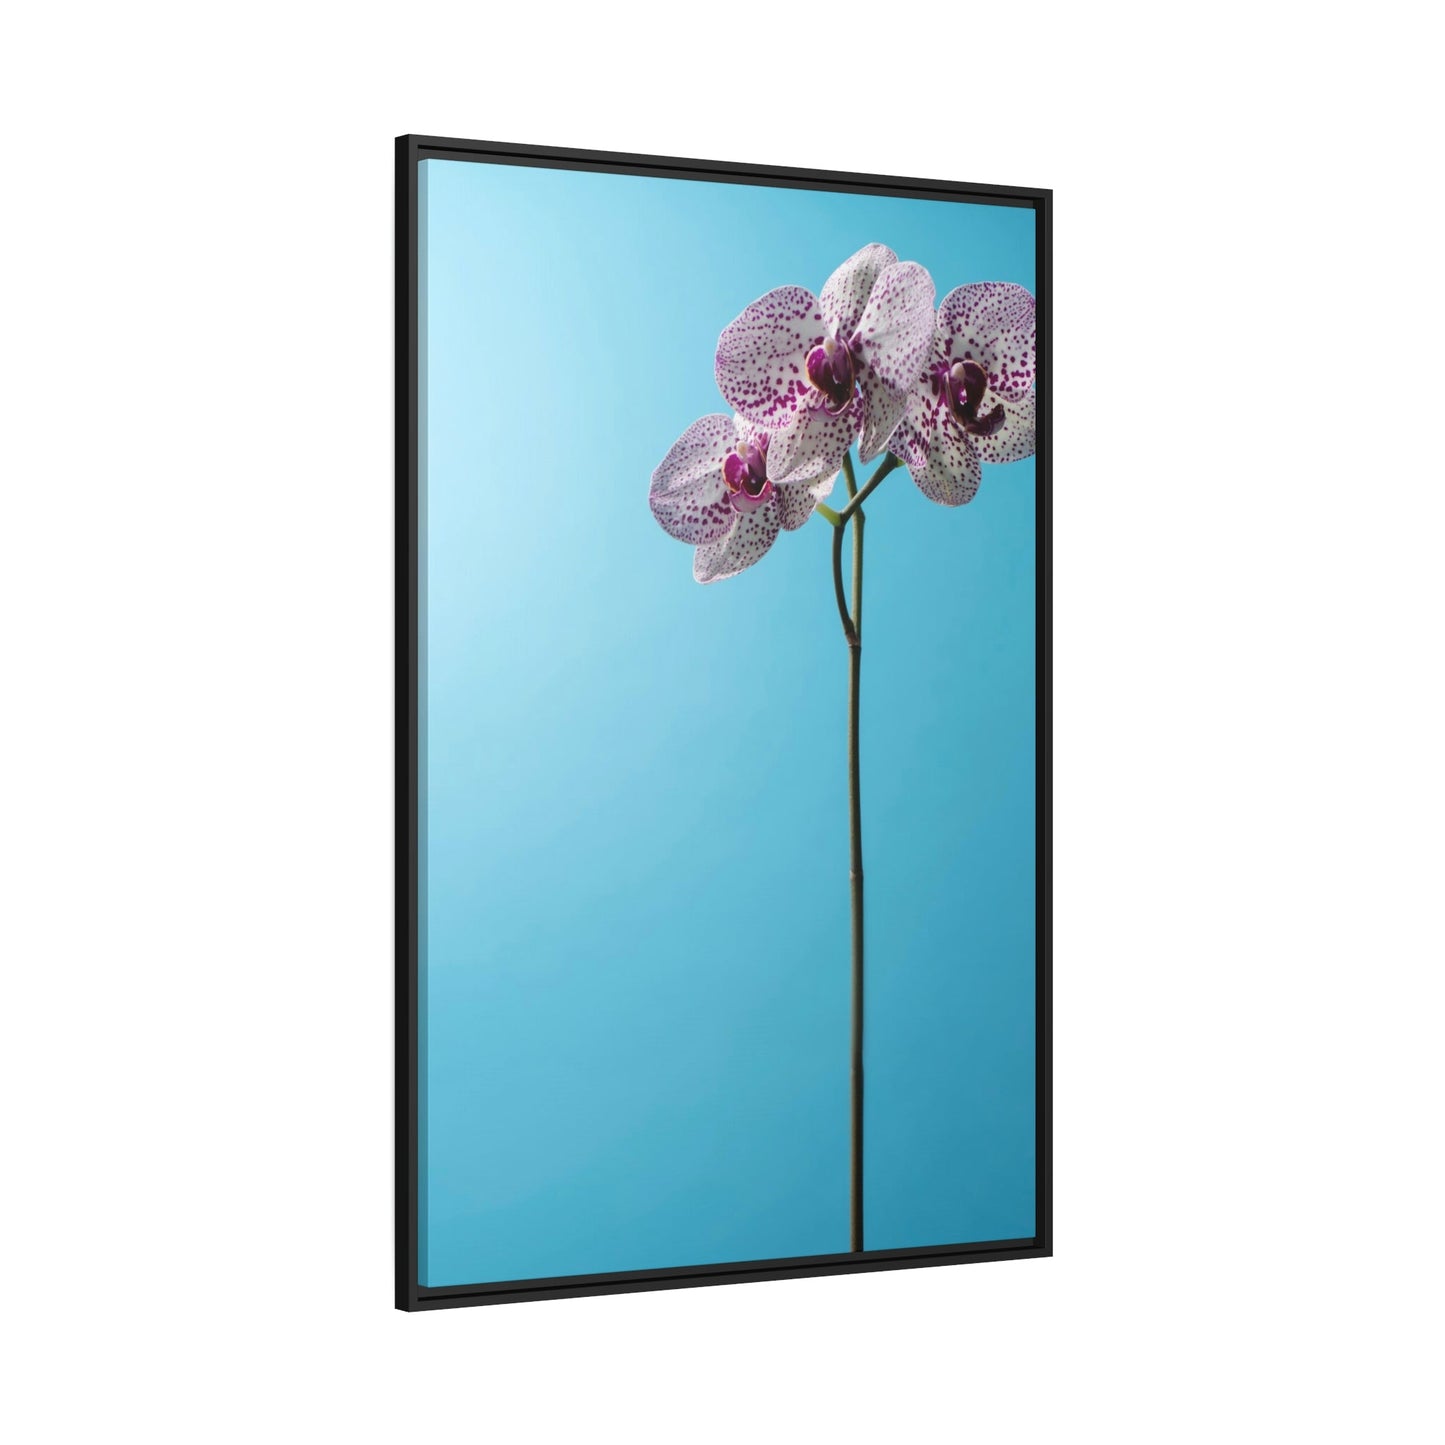 Orchid Elegance: Serenity on Canvas